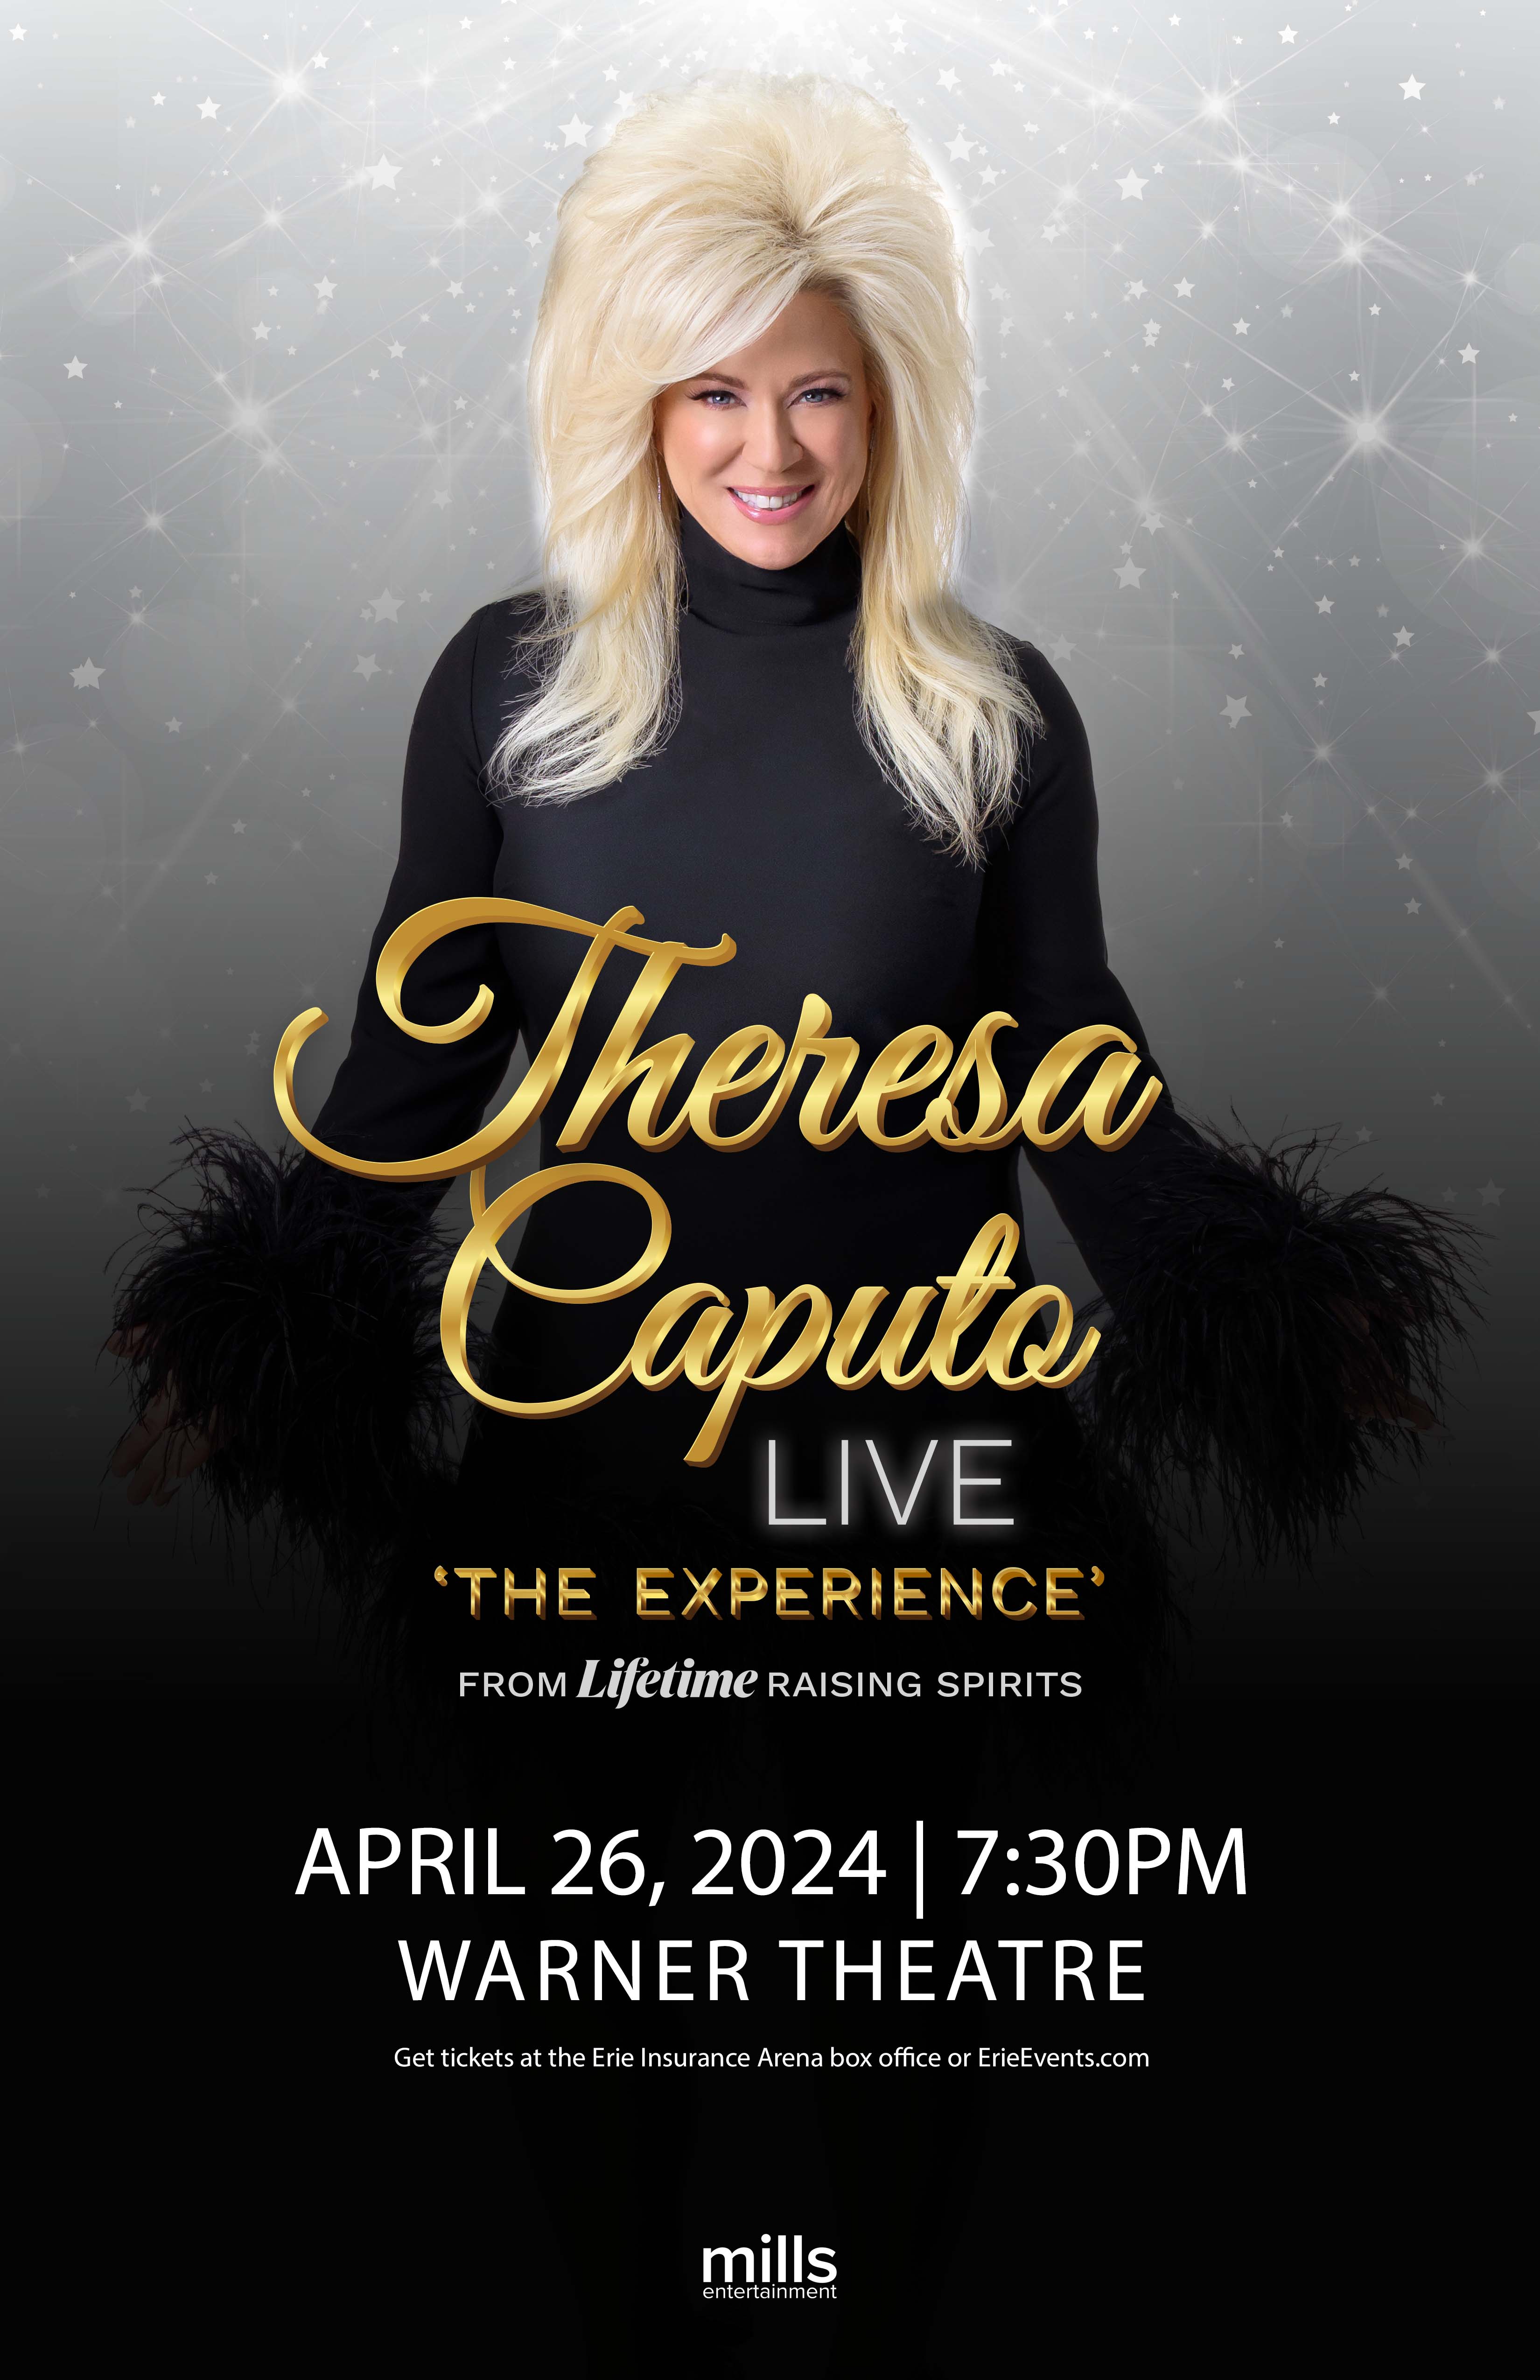 Theresa Caputo Live: The Experience at Warner Theatre